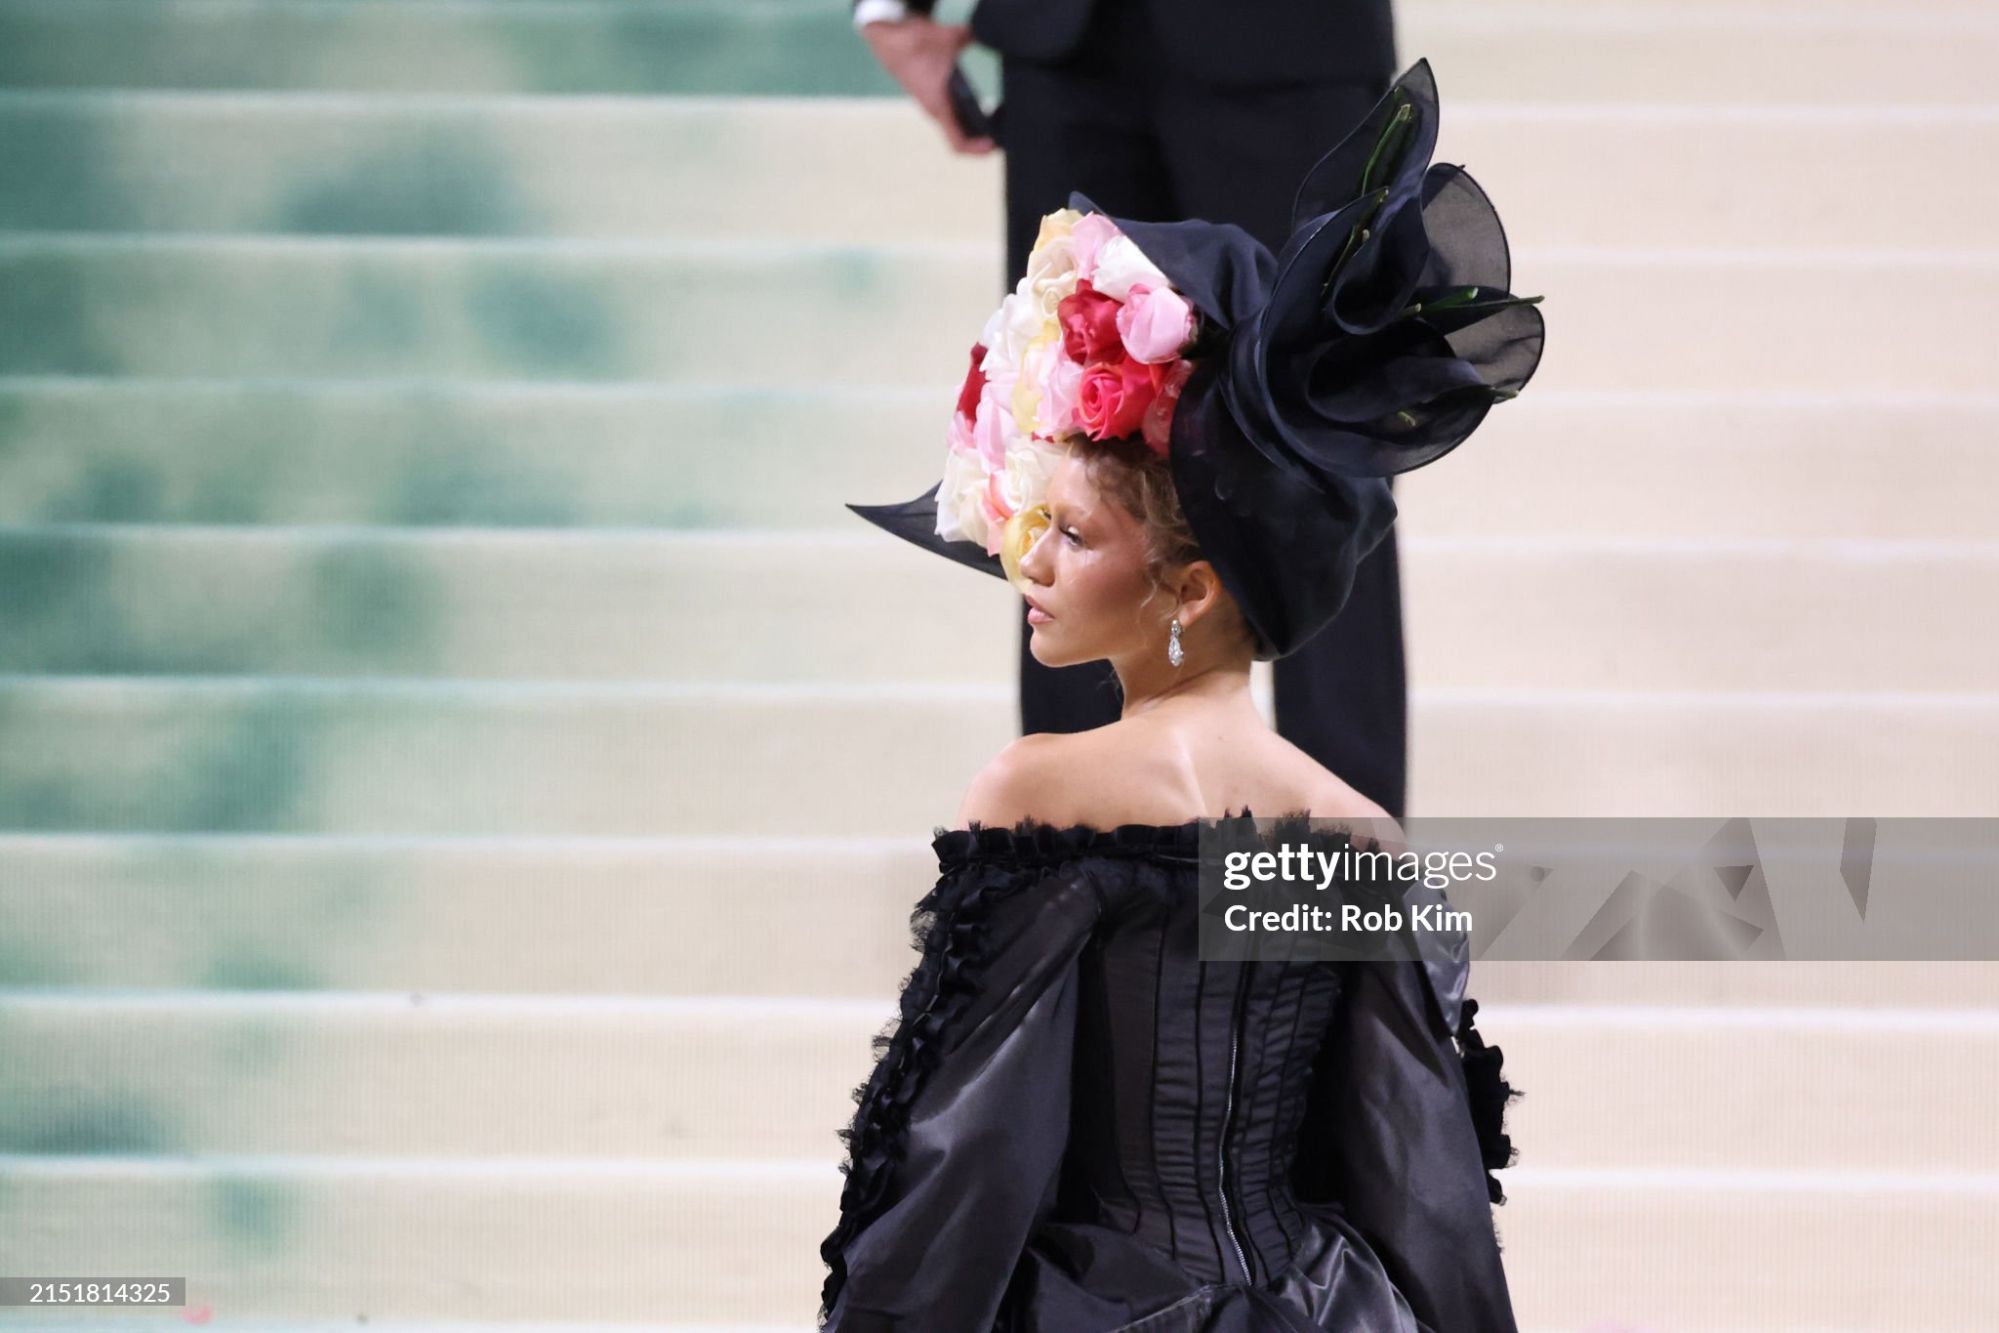 gettyimages-2151814325-2048x2048.jpg